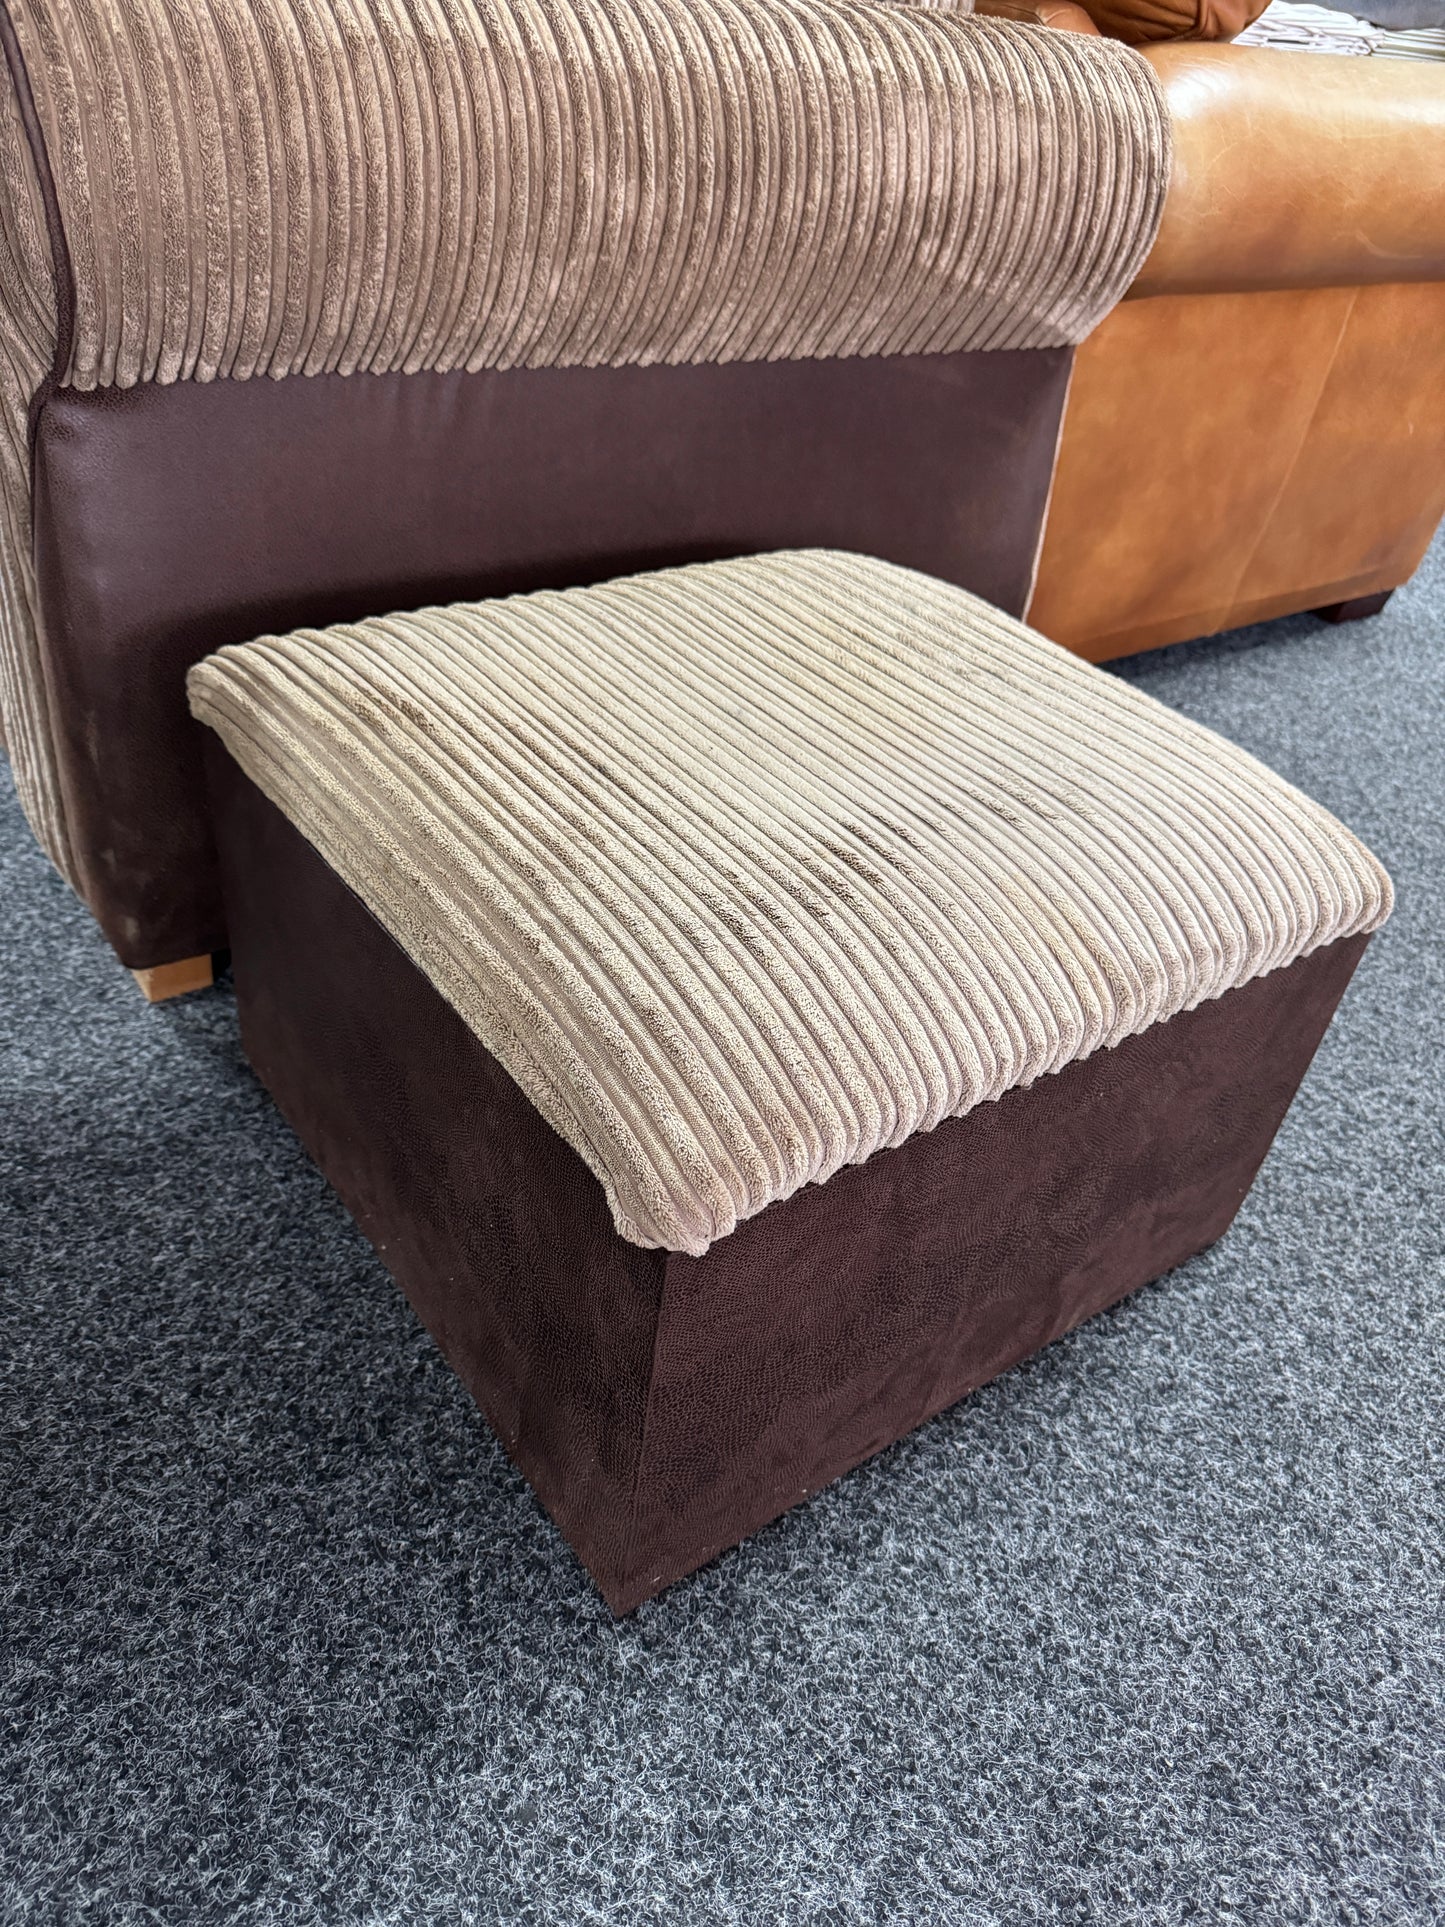 2 seater sofa with matching footstool